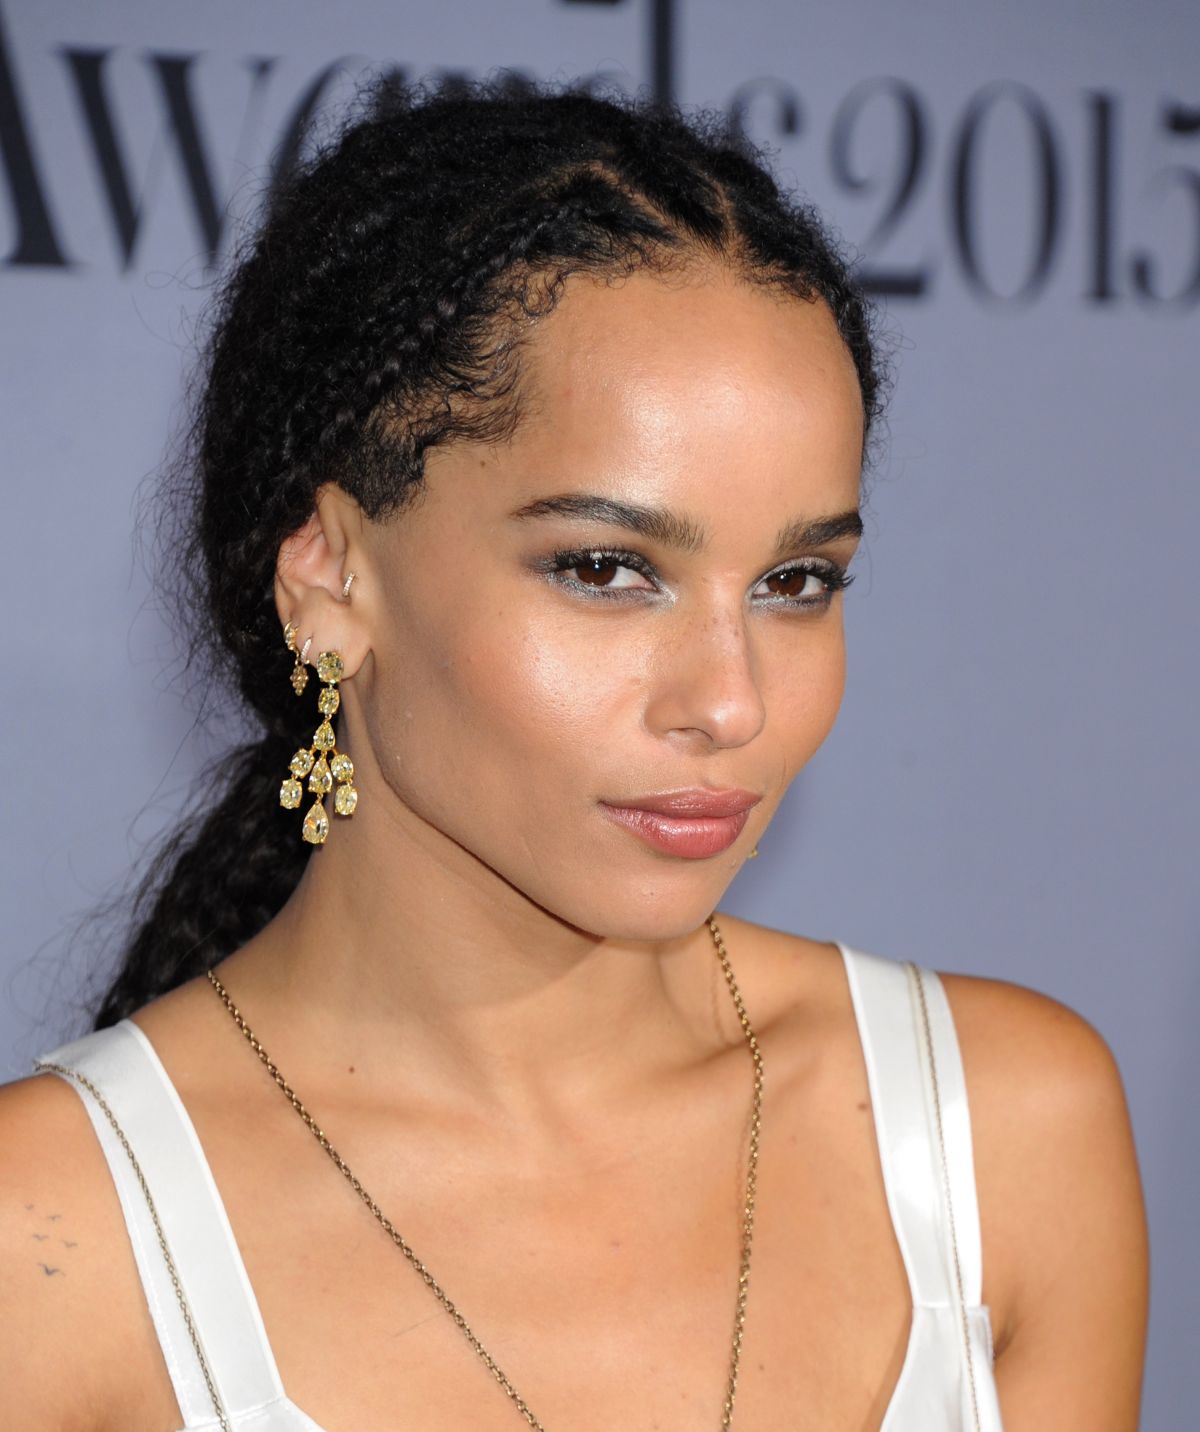 ZOE KRAVITZ at InStyle Awards 2015 in Los Angeles 10/26/2015 – HawtCelebs